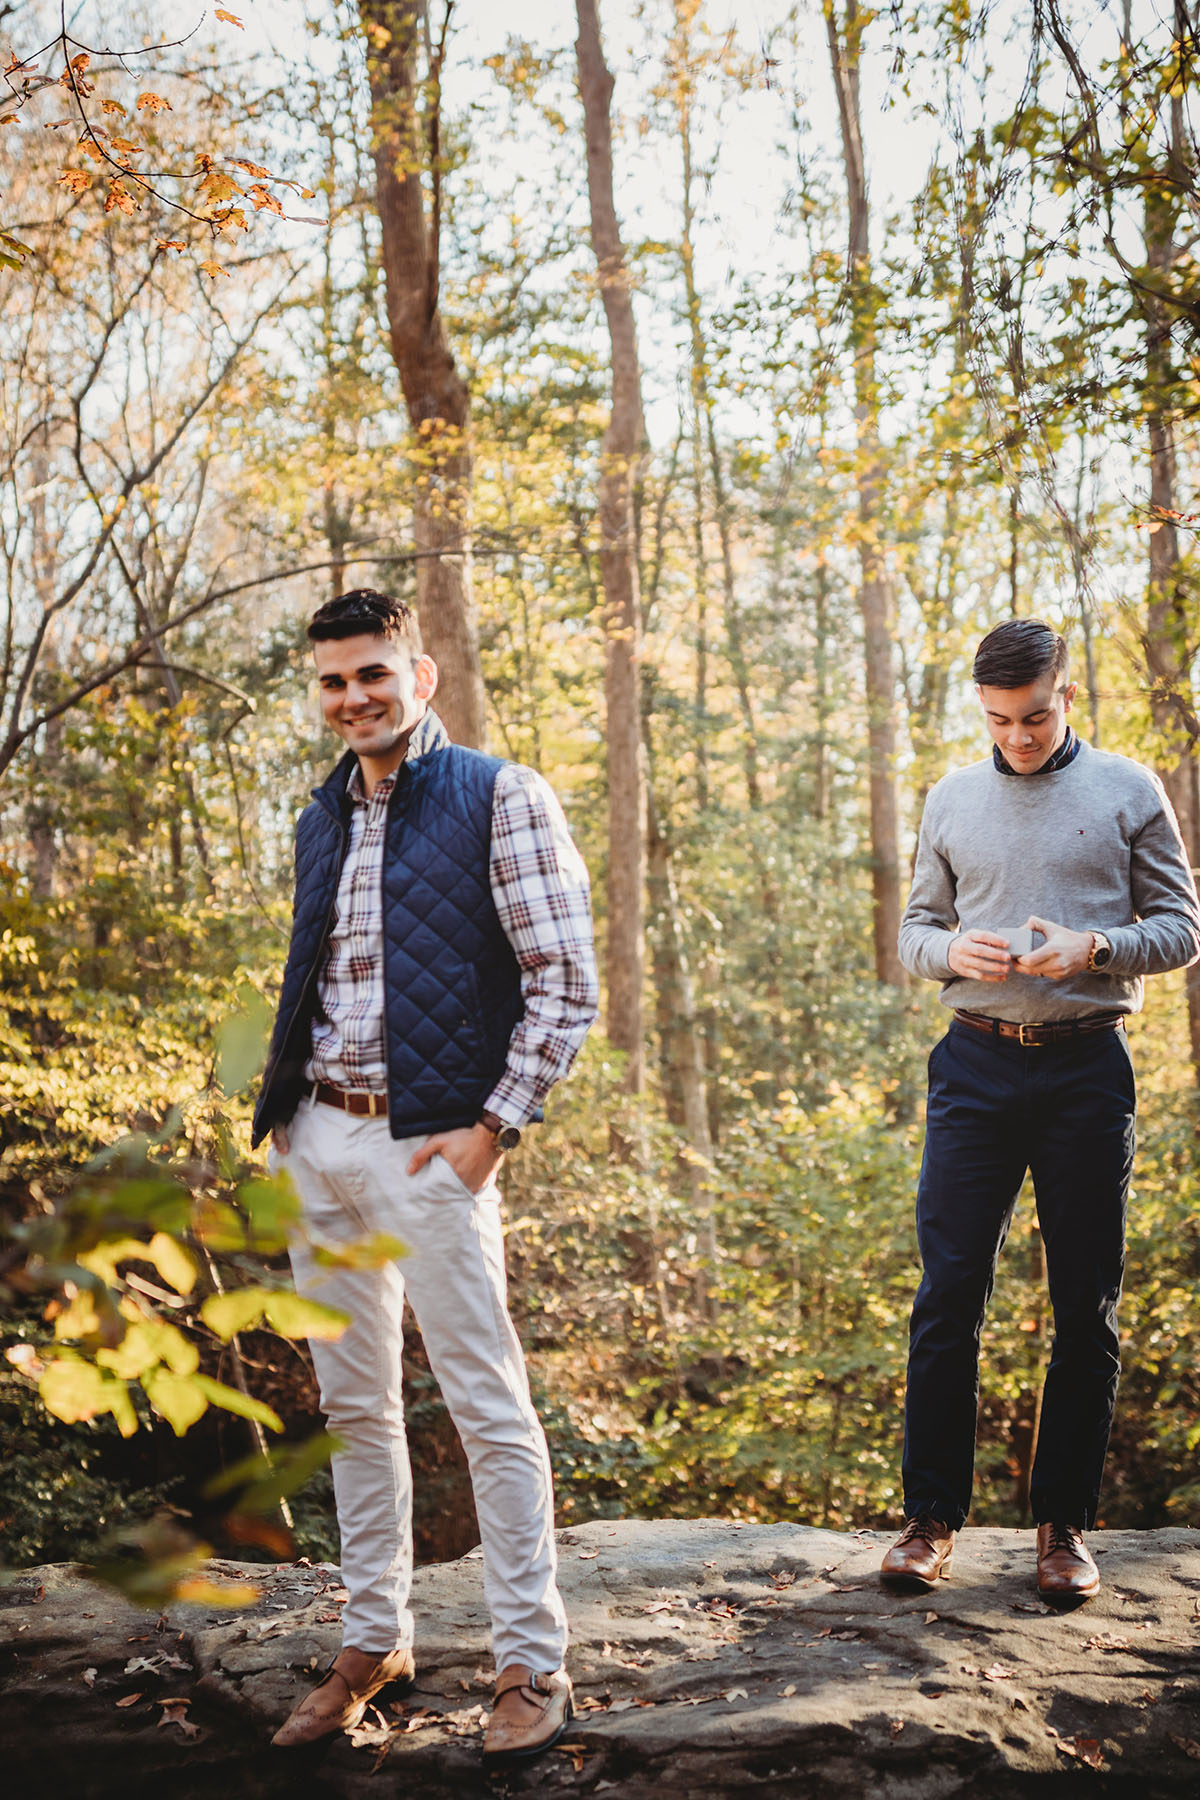 Autumn surprise proposal at Government Island two grooms gay engagement fall foliage Stafford, Virginia flannel shirt jeans woods